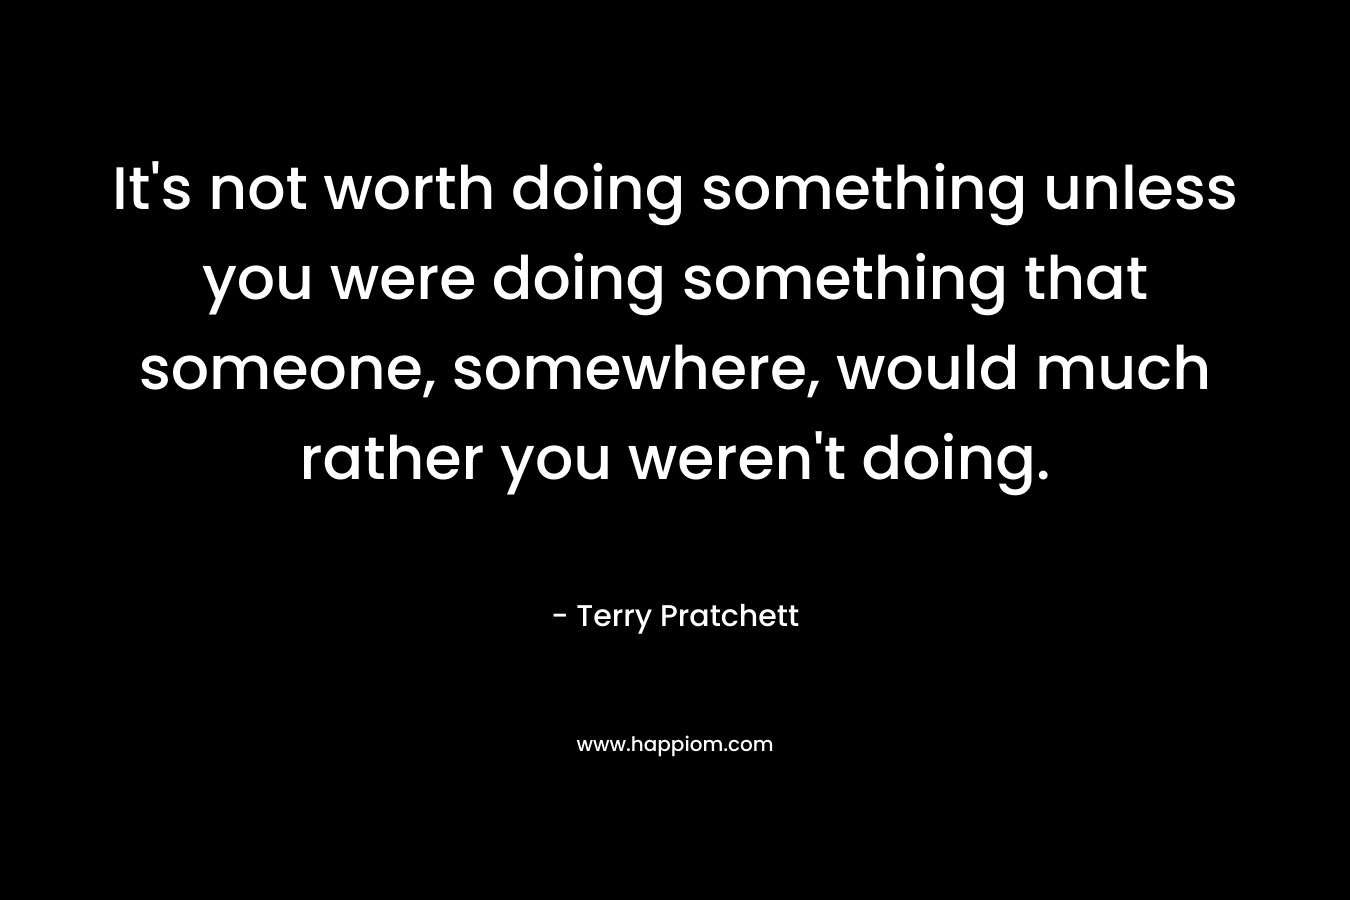 It's not worth doing something unless you were doing something that someone, somewhere, would much rather you weren't doing.